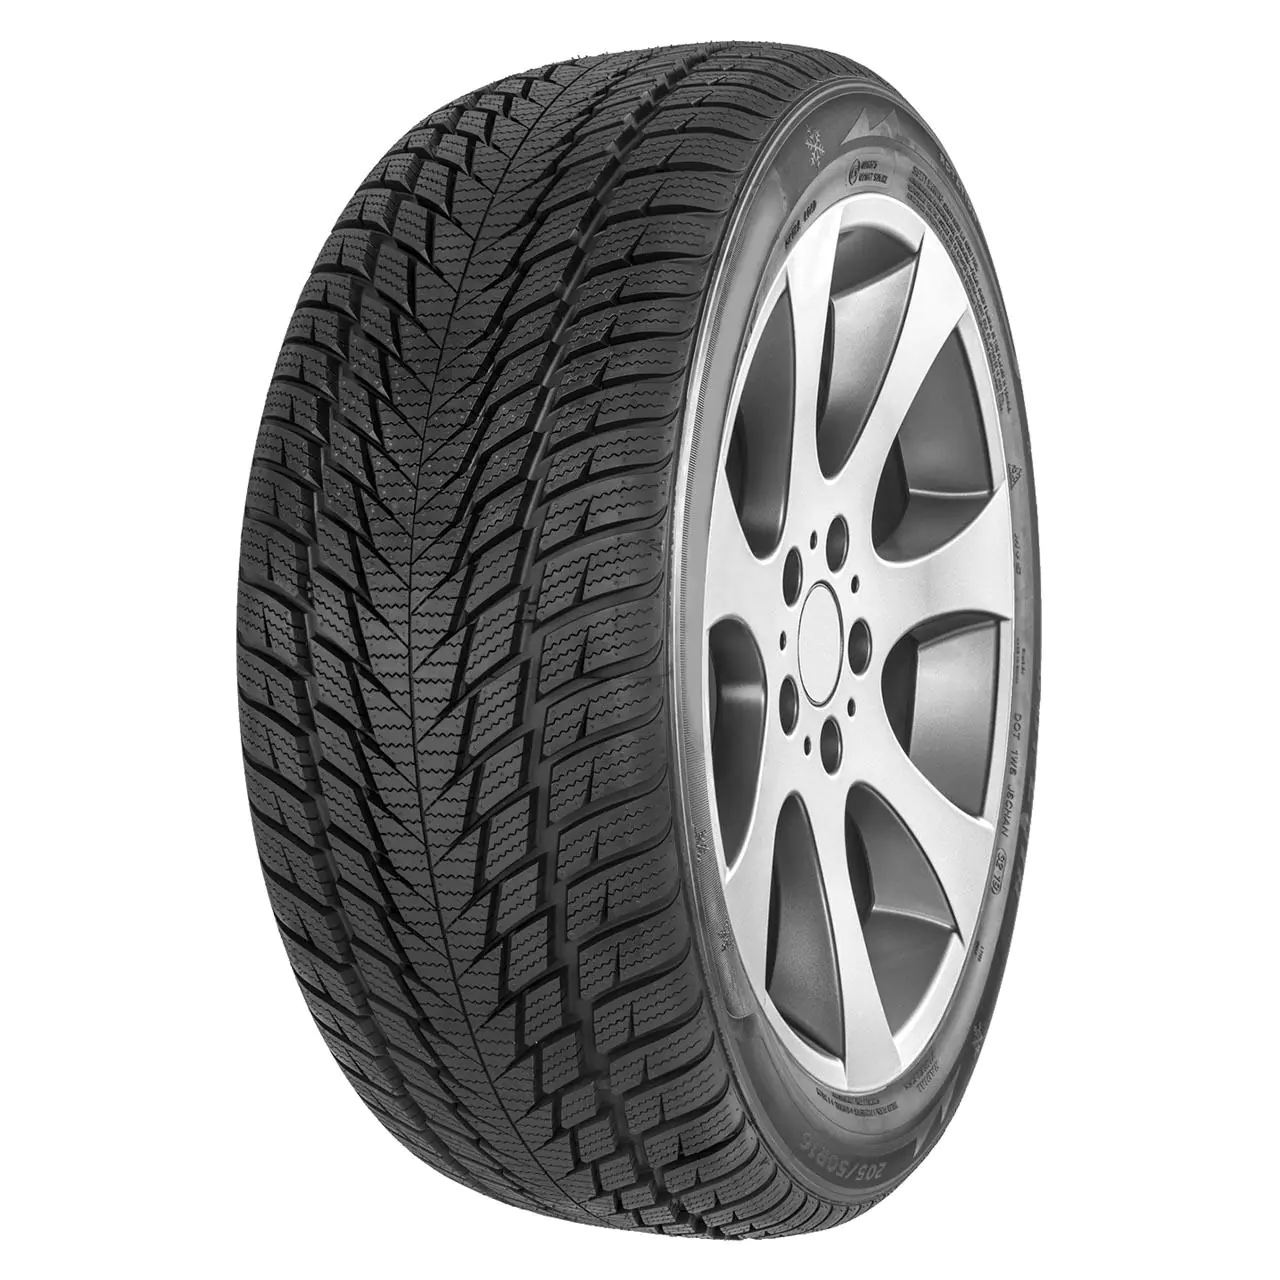 Gomme Autovettura Fortuna 225/50 R18 99V GOWIN UHP3 XL M+S Invernale